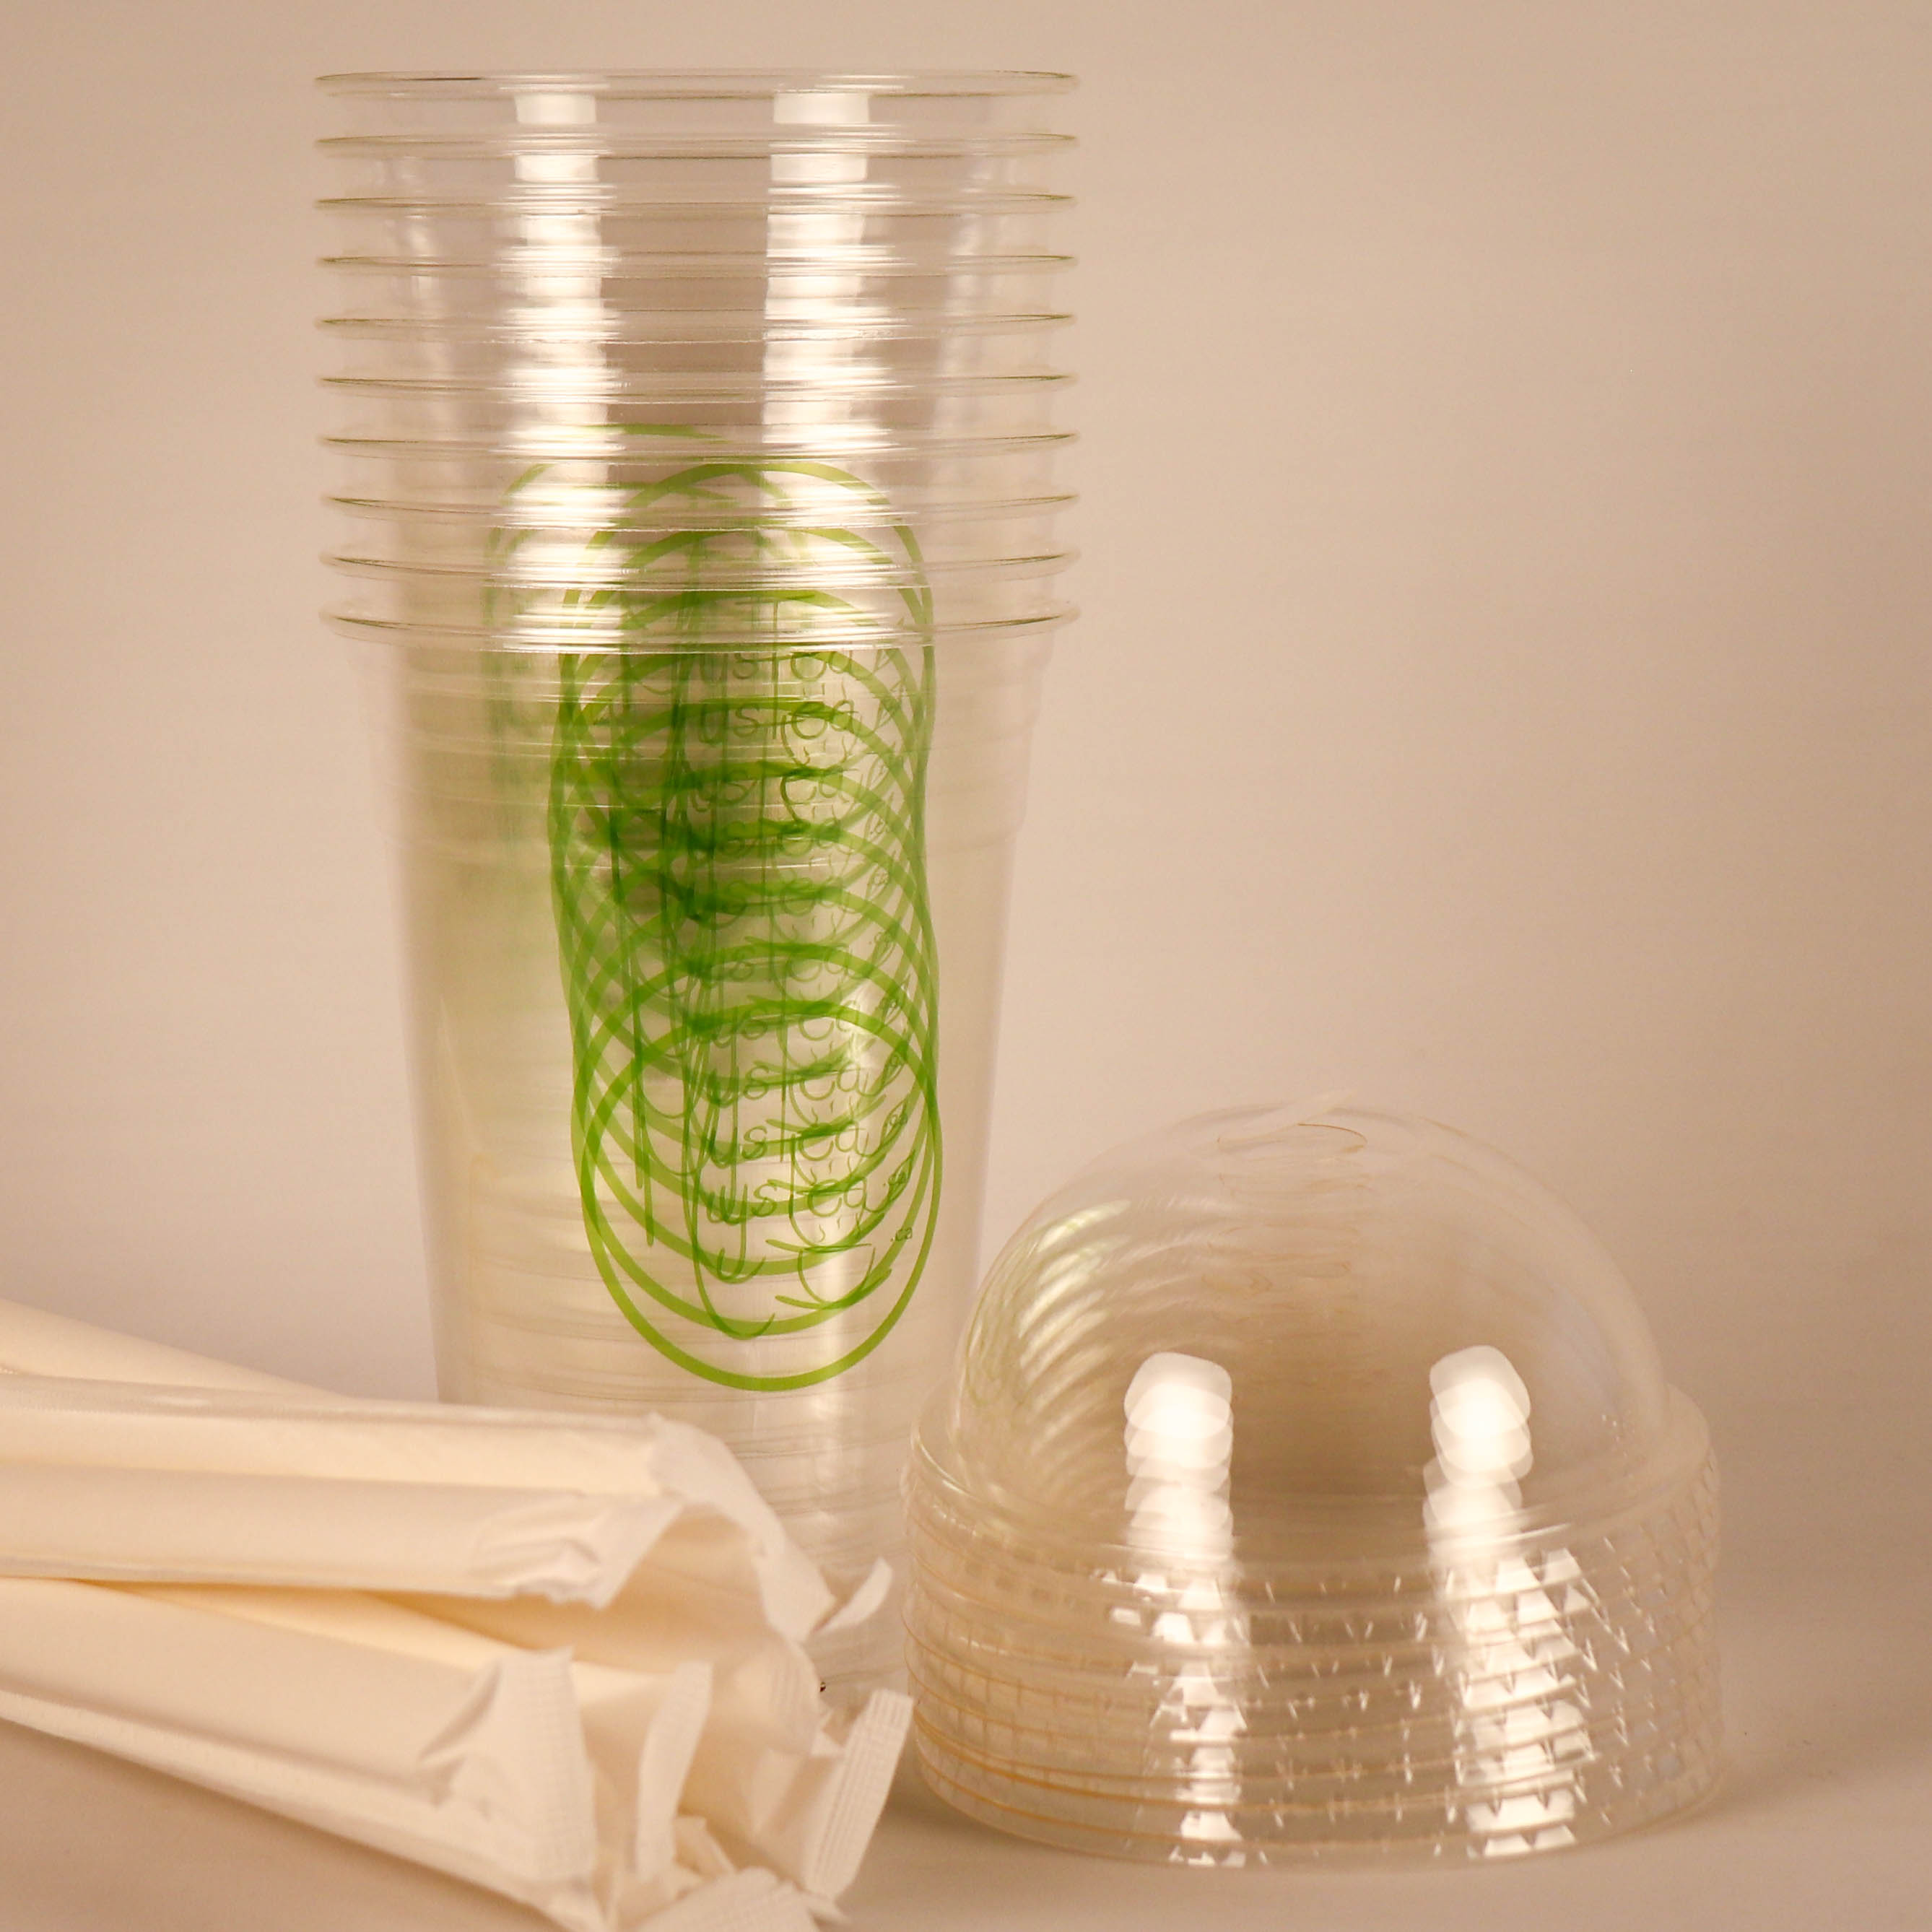 Set of compostable glasses, lids and straws